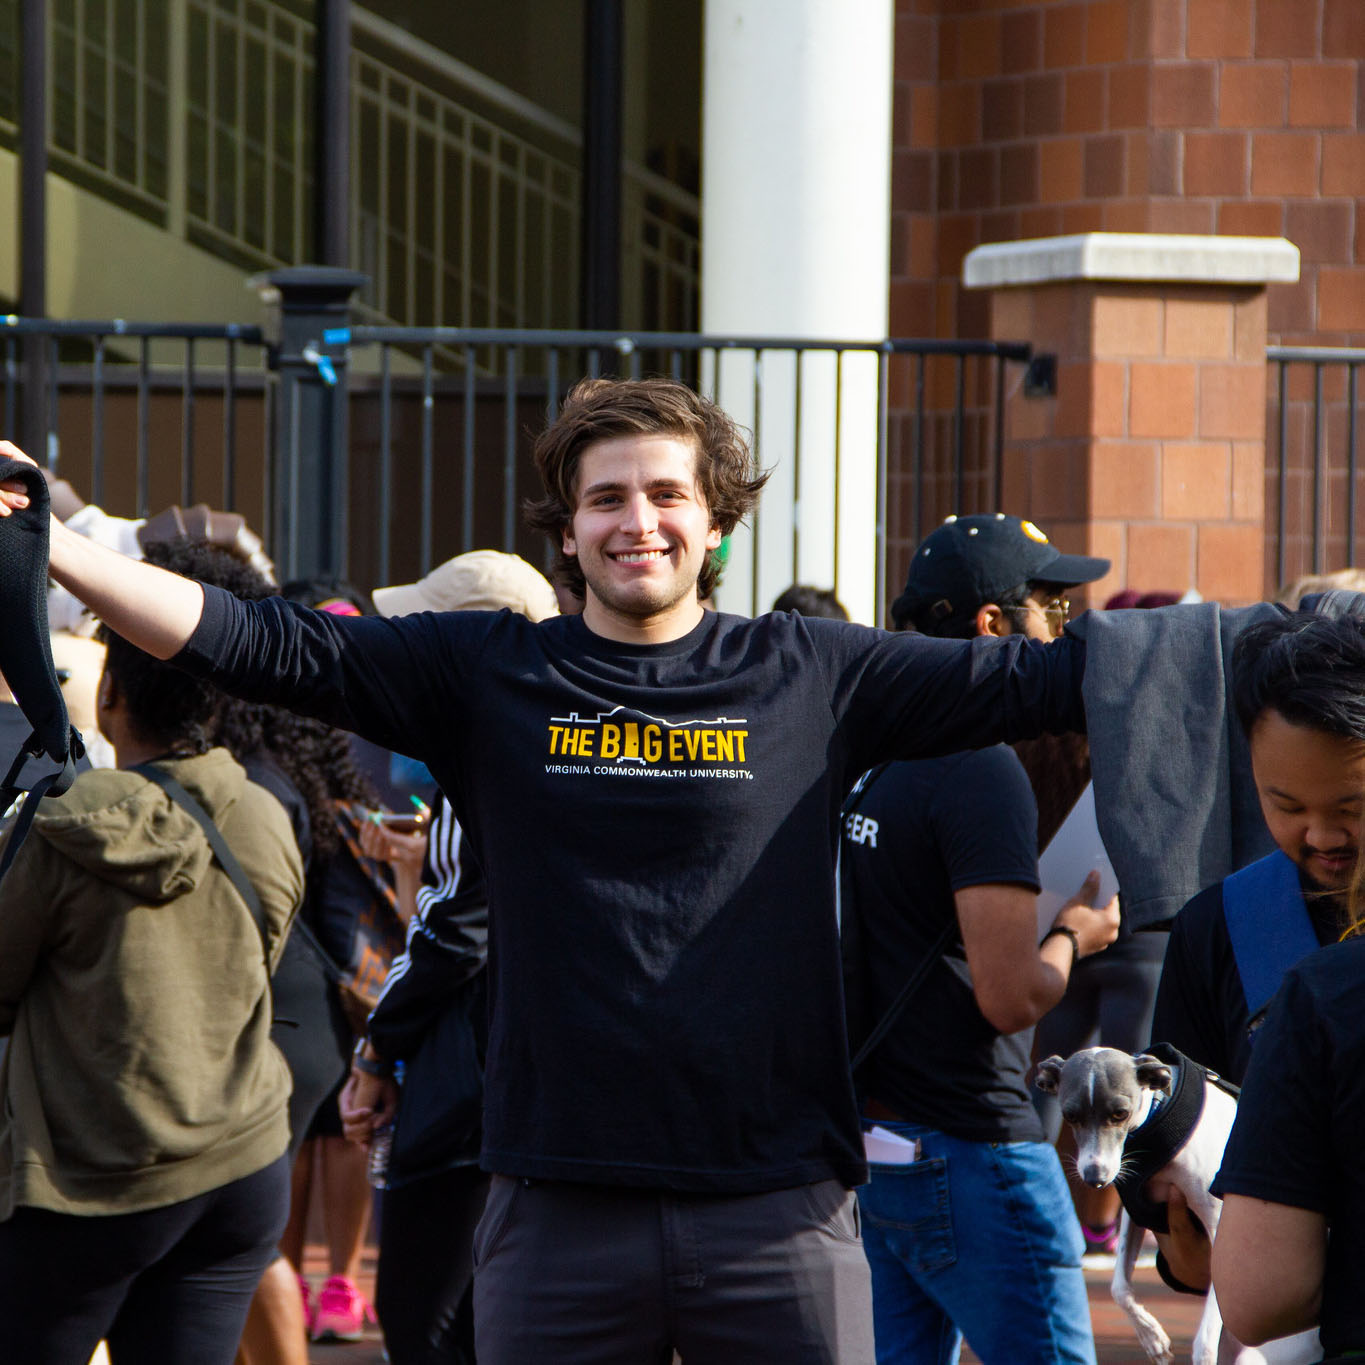 A male student with arms outstretched wearing The Big Event shirt in The Commons Plaza